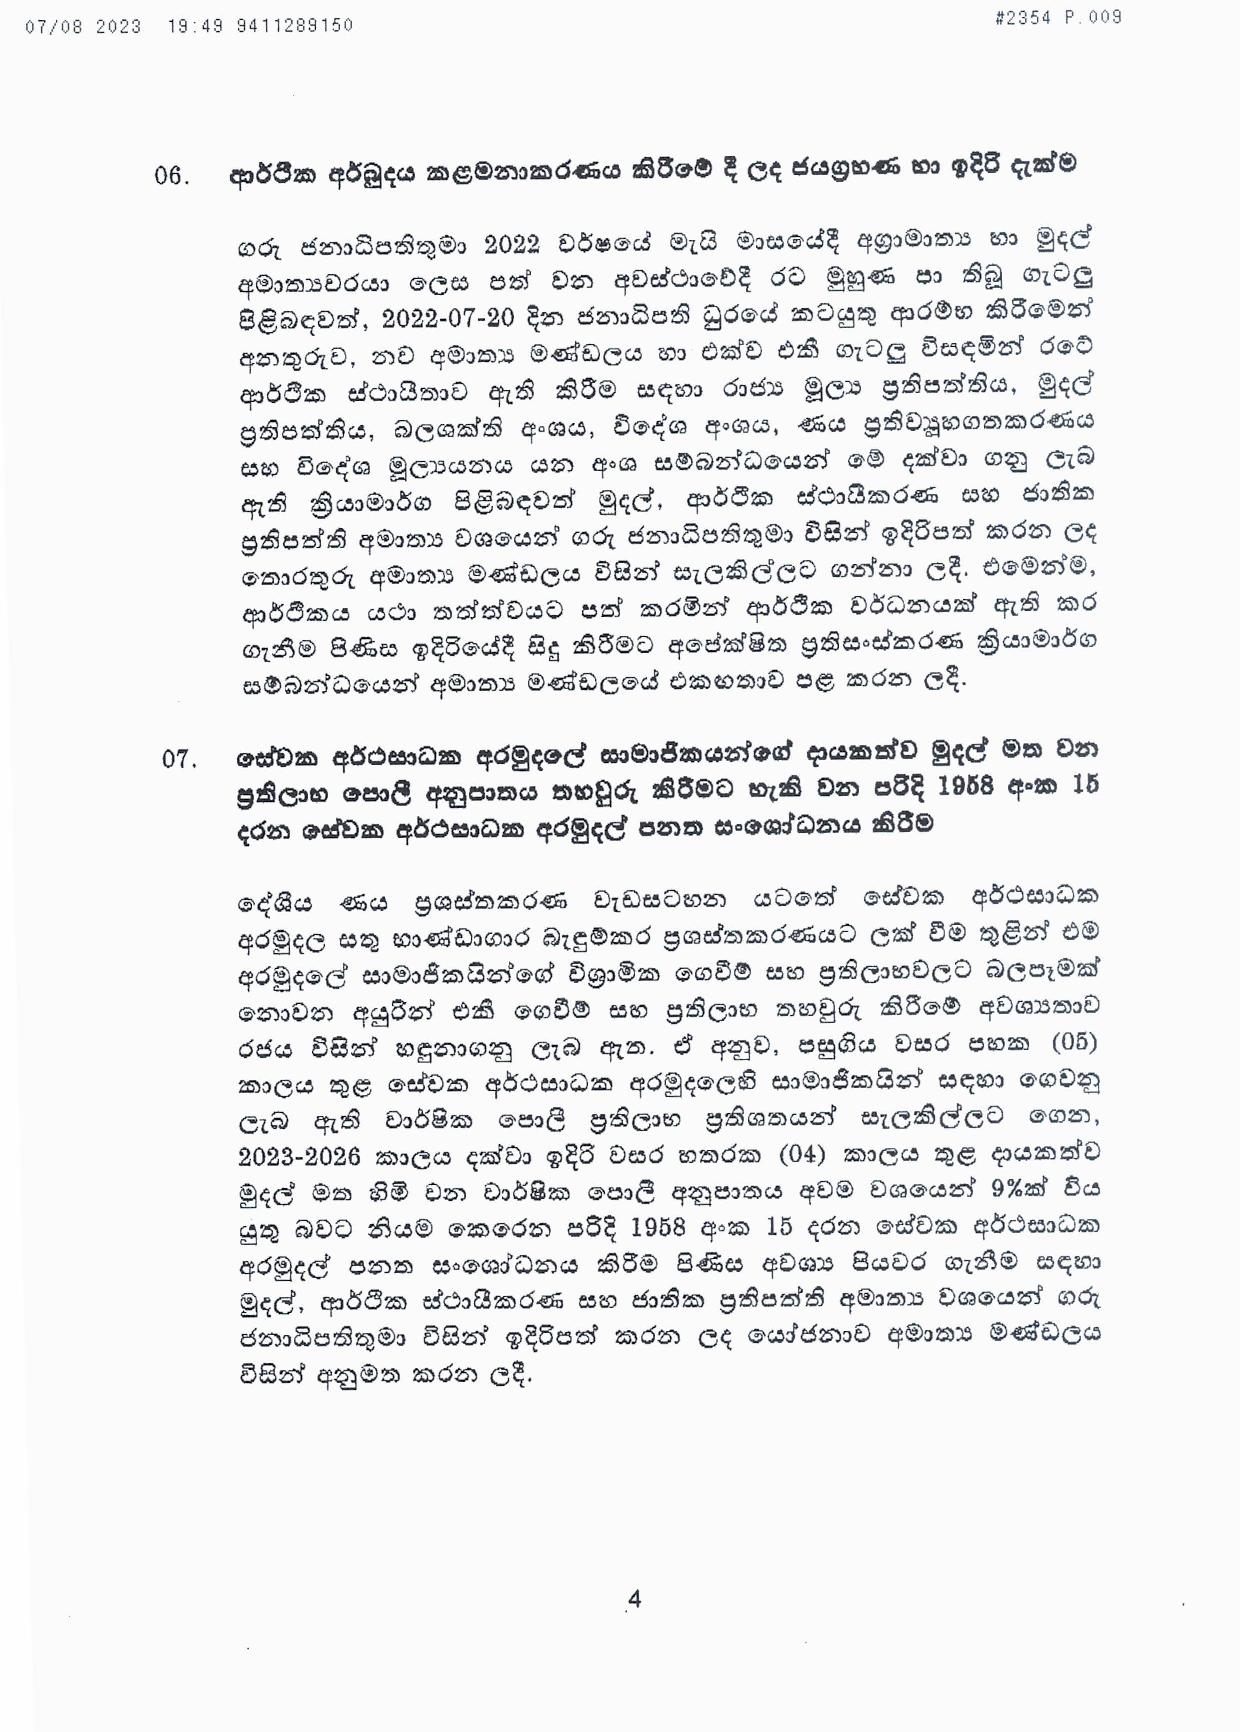 Cabinet Decision on 07.08.2023 page 004